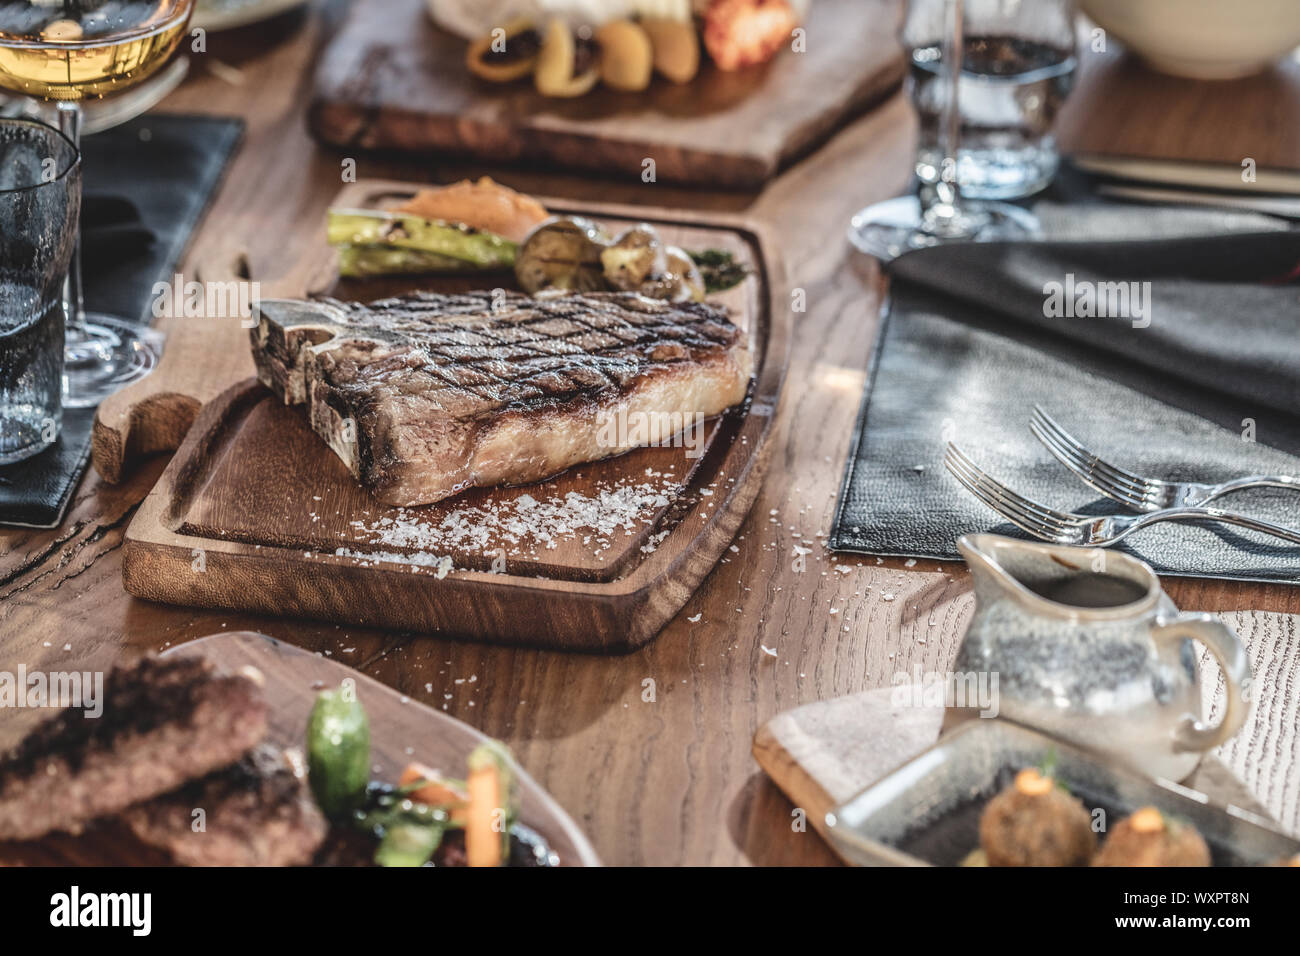 Barbecue beef t-bone  steak  served on wooden serving plate with wine and grilled vegetables Stock Photo